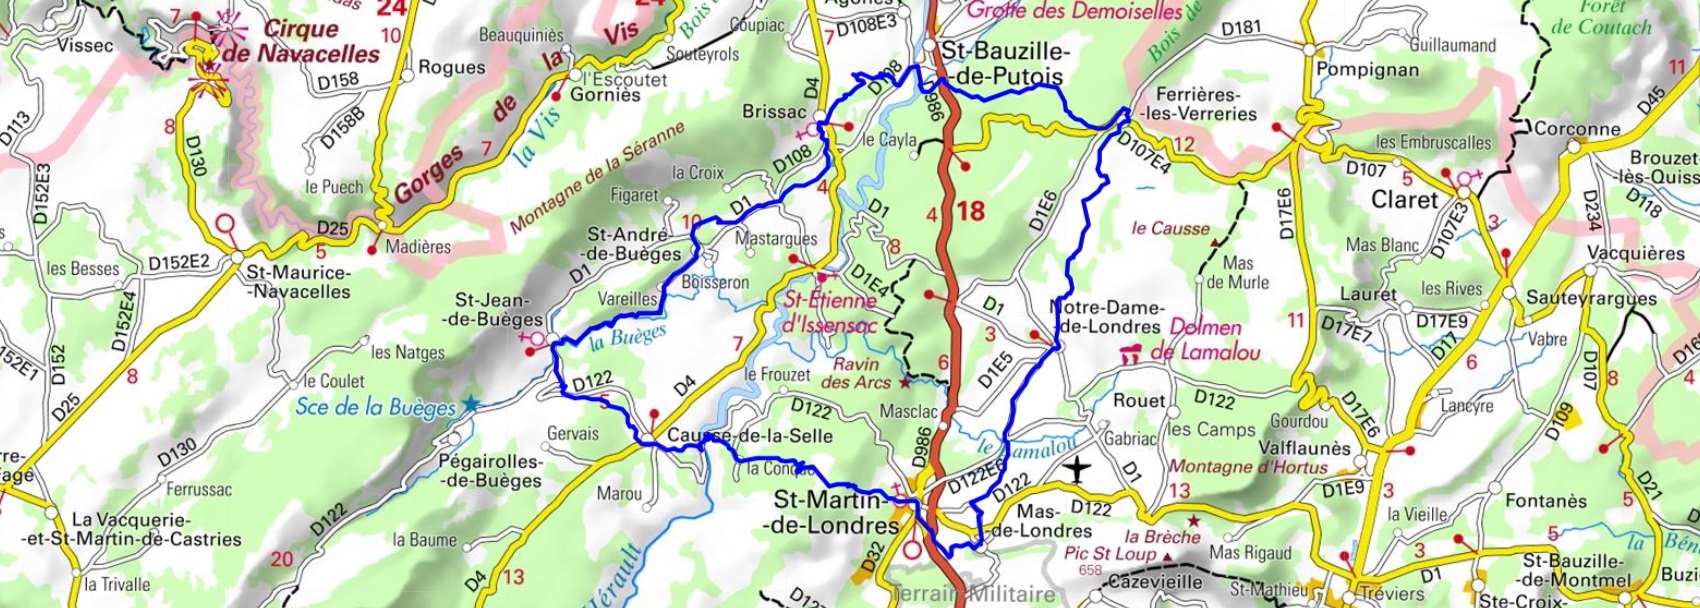 Hiking around Grand Pic St-Loup between Londres and Bueges (Herault) 1